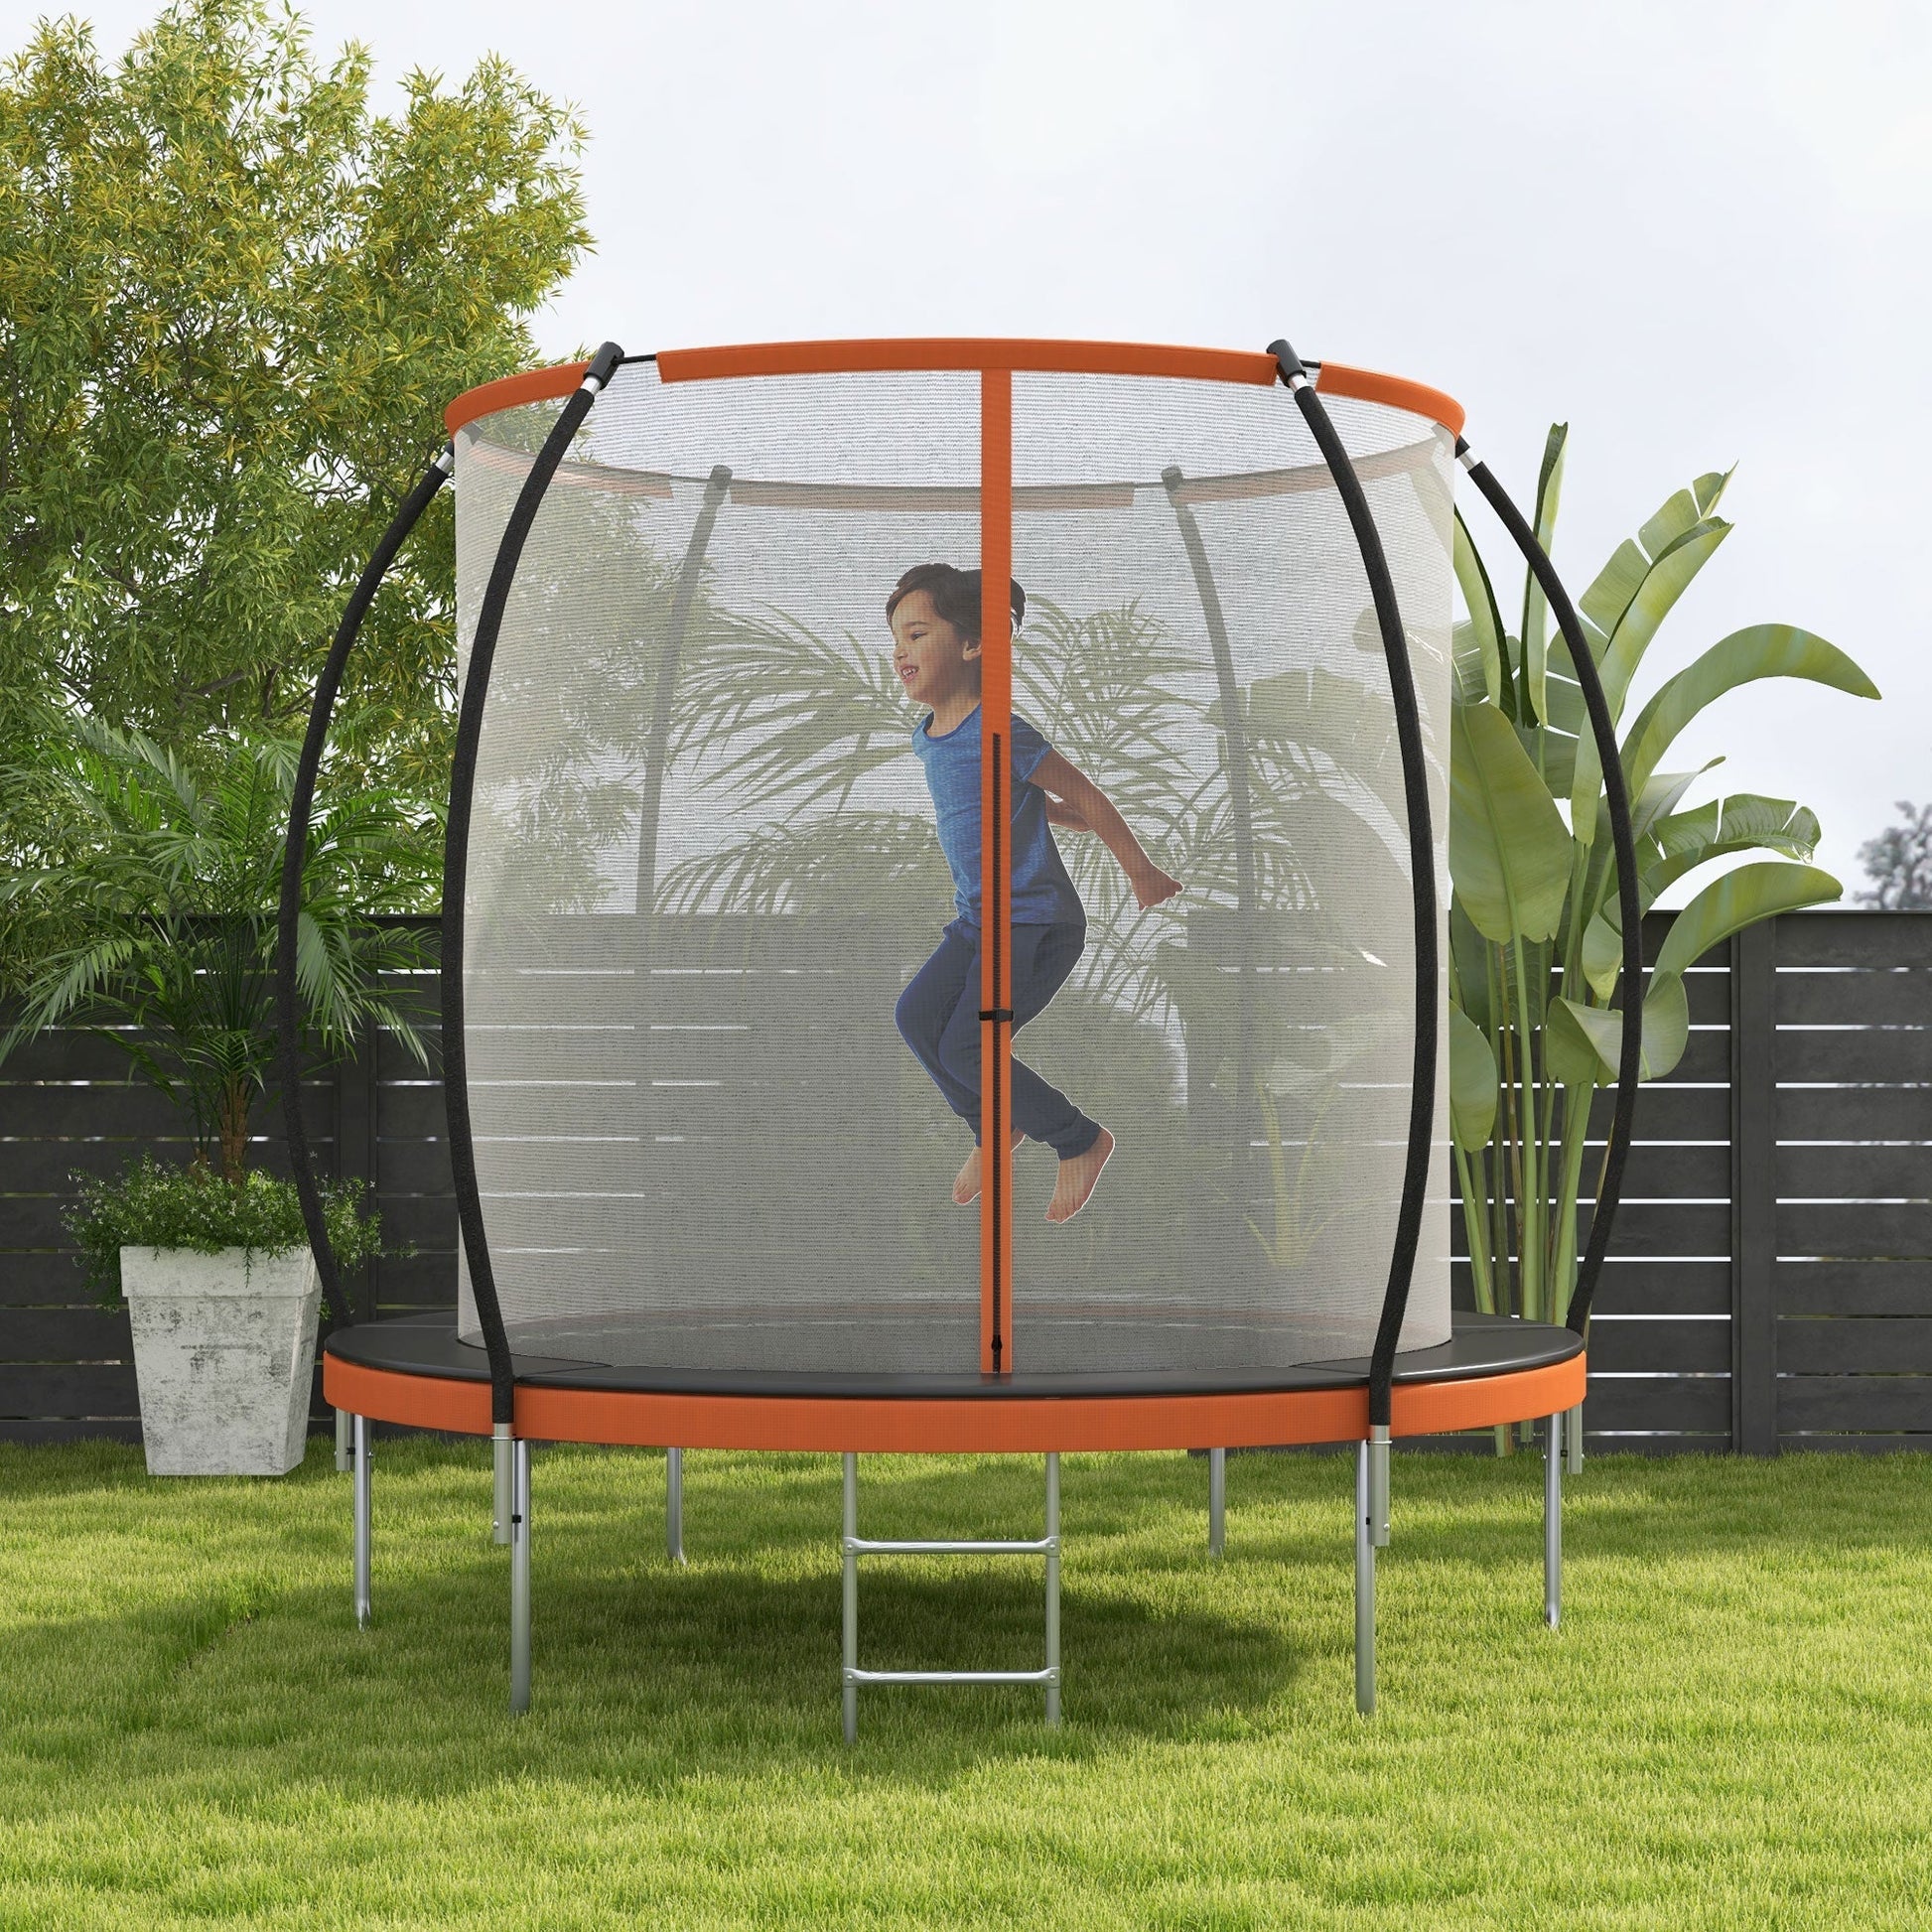 10ft Outdoor Trampoline with Enclosure Net and Ladder, Backyard Fitness Trampoline for Teens and Adults at Gallery Canada